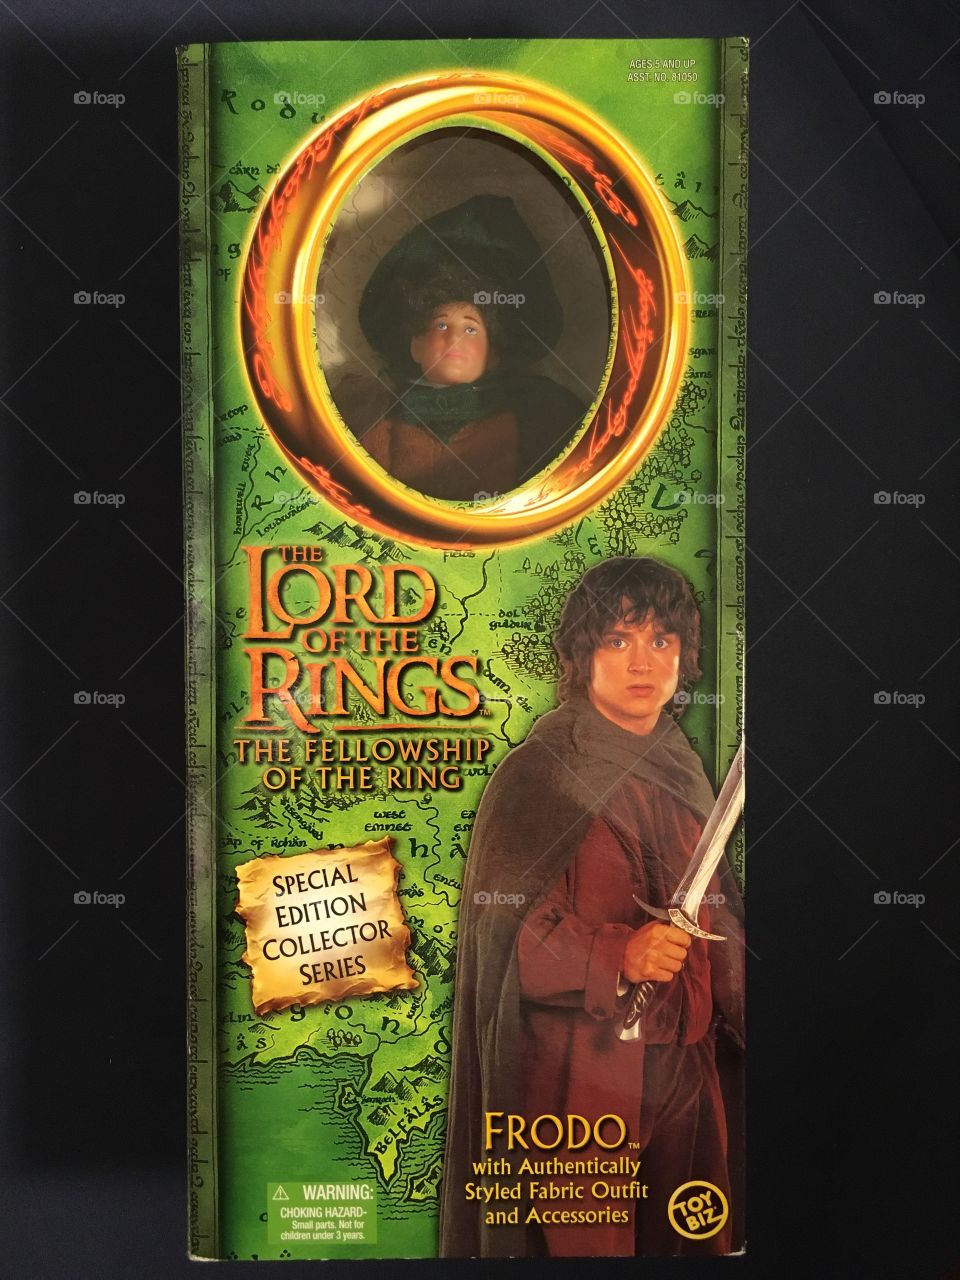 The Lord of the Rings - The Fellowship of the Ring - Collectors Edition - Frodo 
Released - 2001